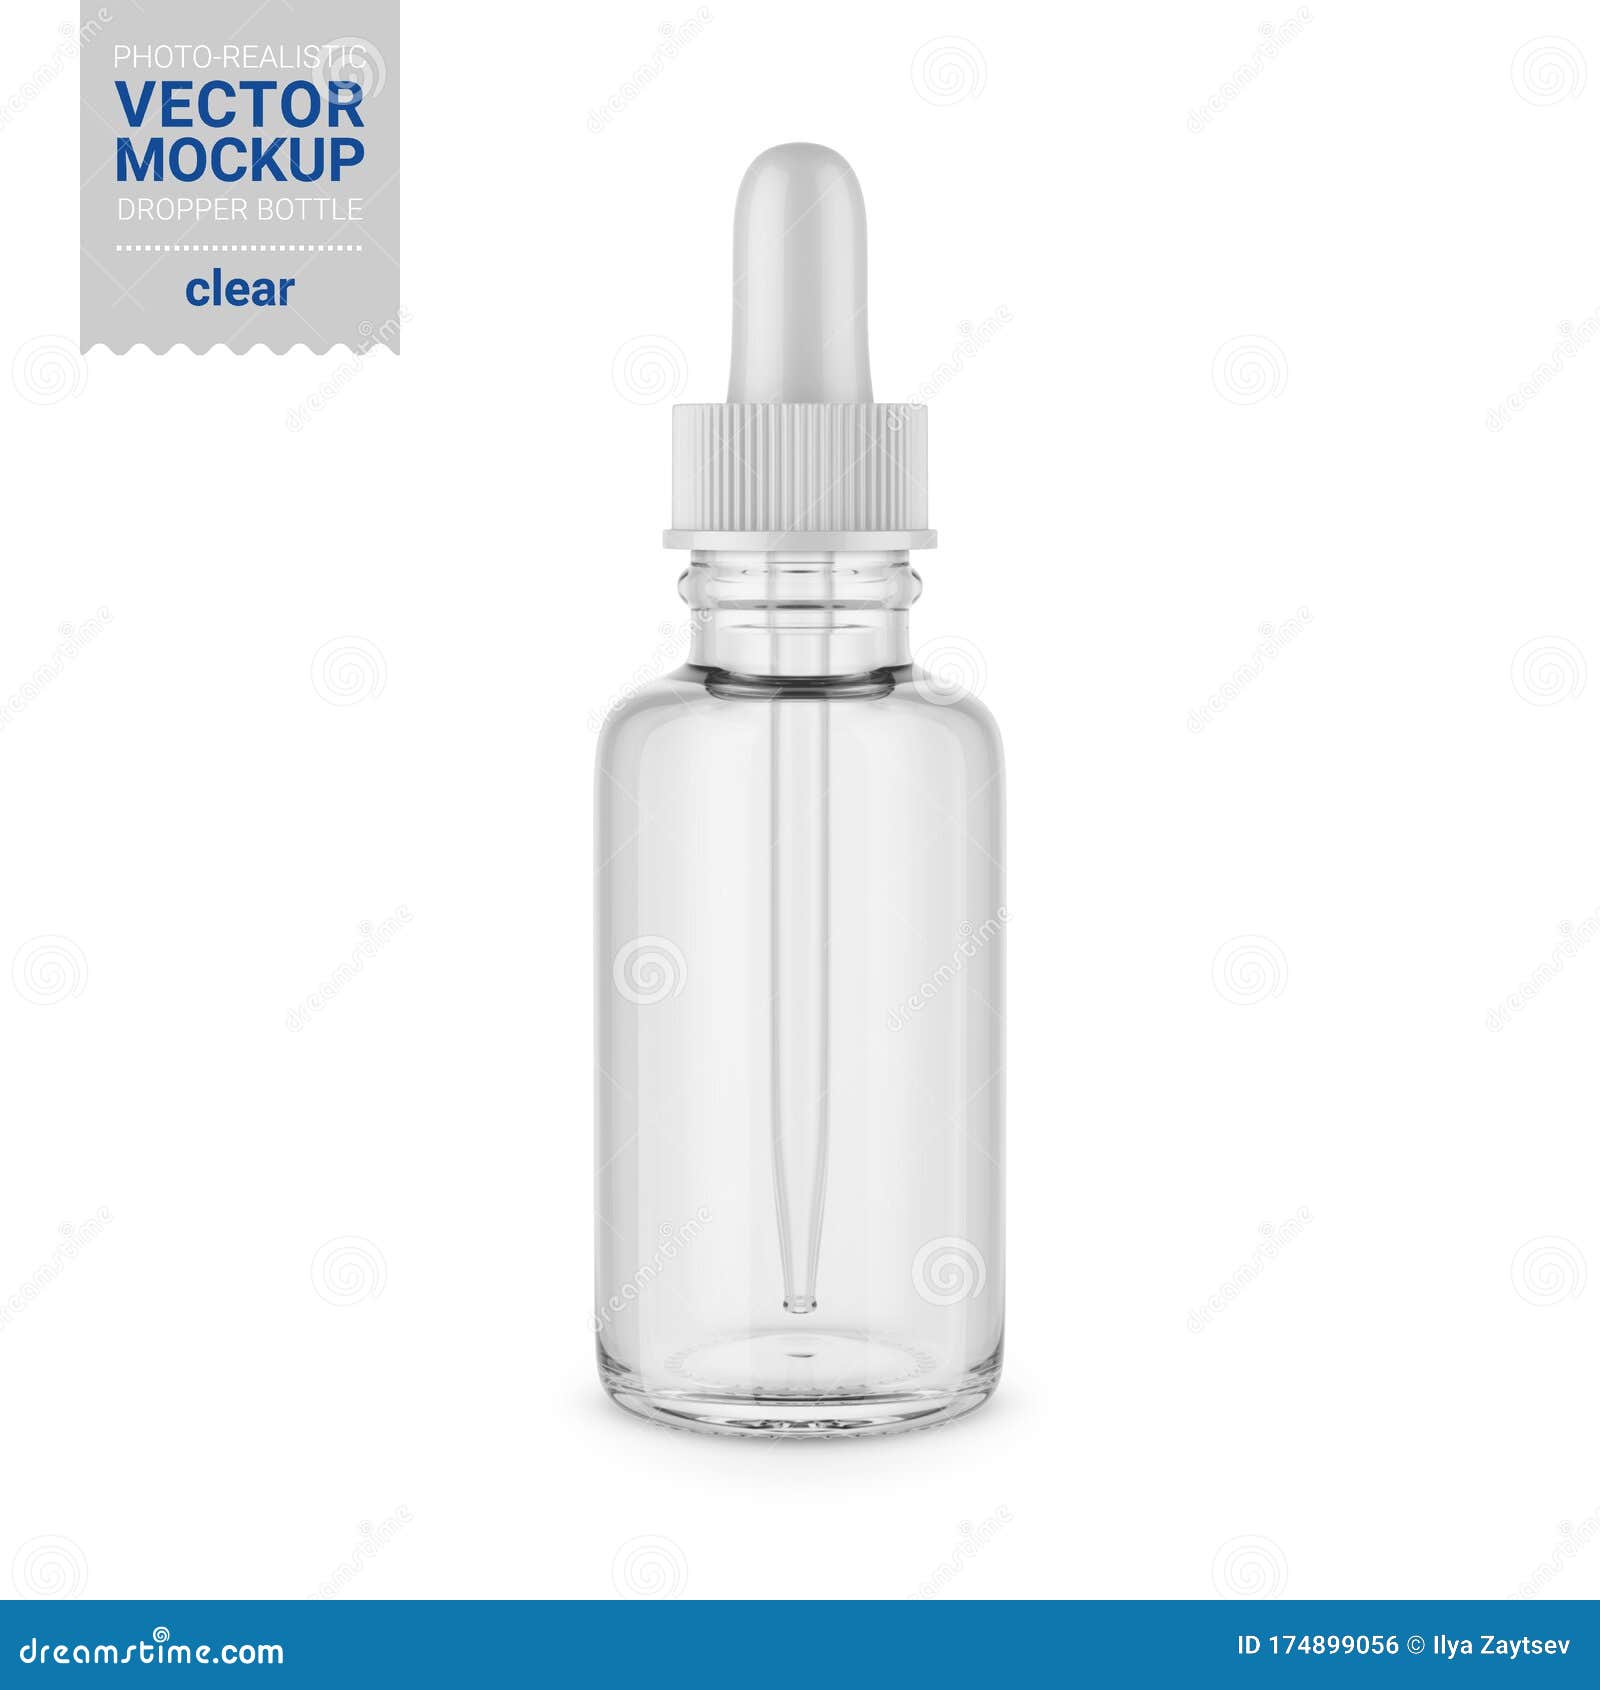 Download Clear Glass Dropper Bottle Mockup Vector Illustration Stock Illustration Illustration Of Packaging Round 174899056